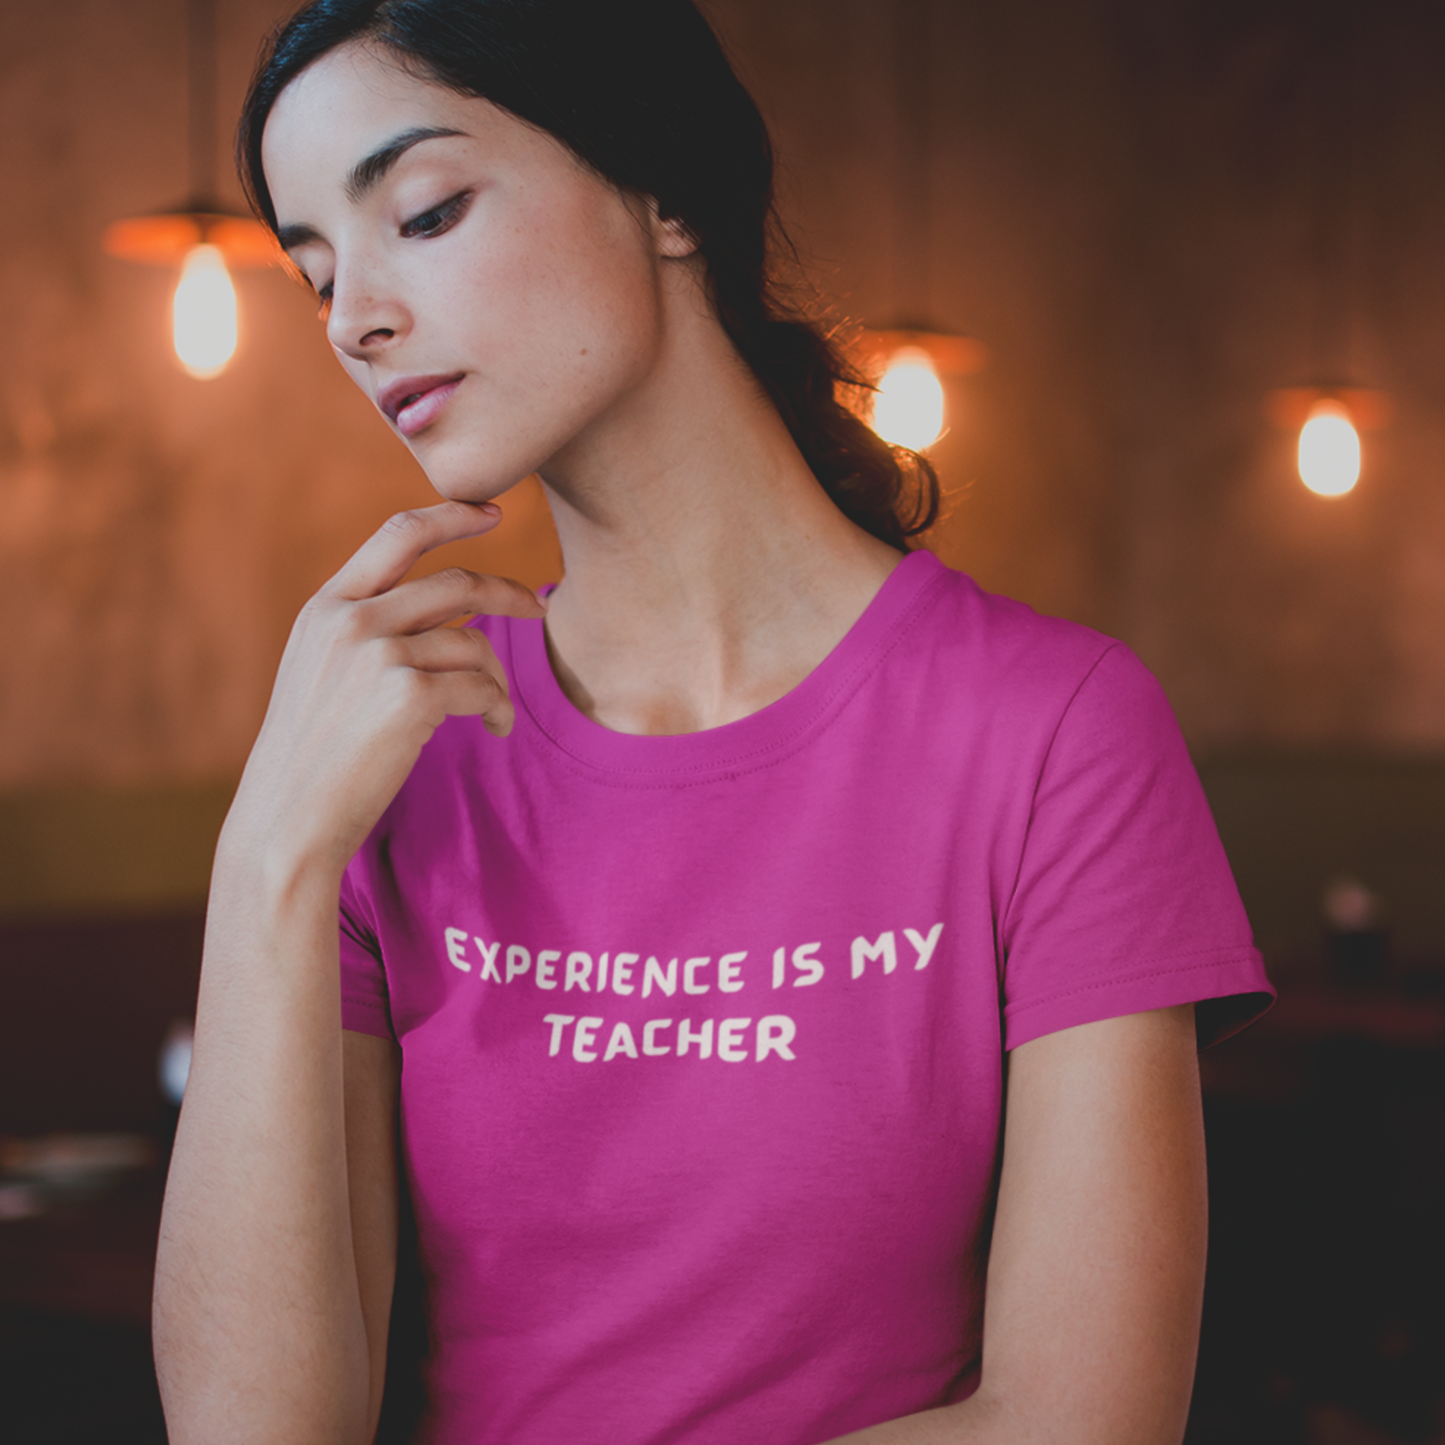 Experience is my teacher unisex tee shirt gift, t shirt with meaningful words